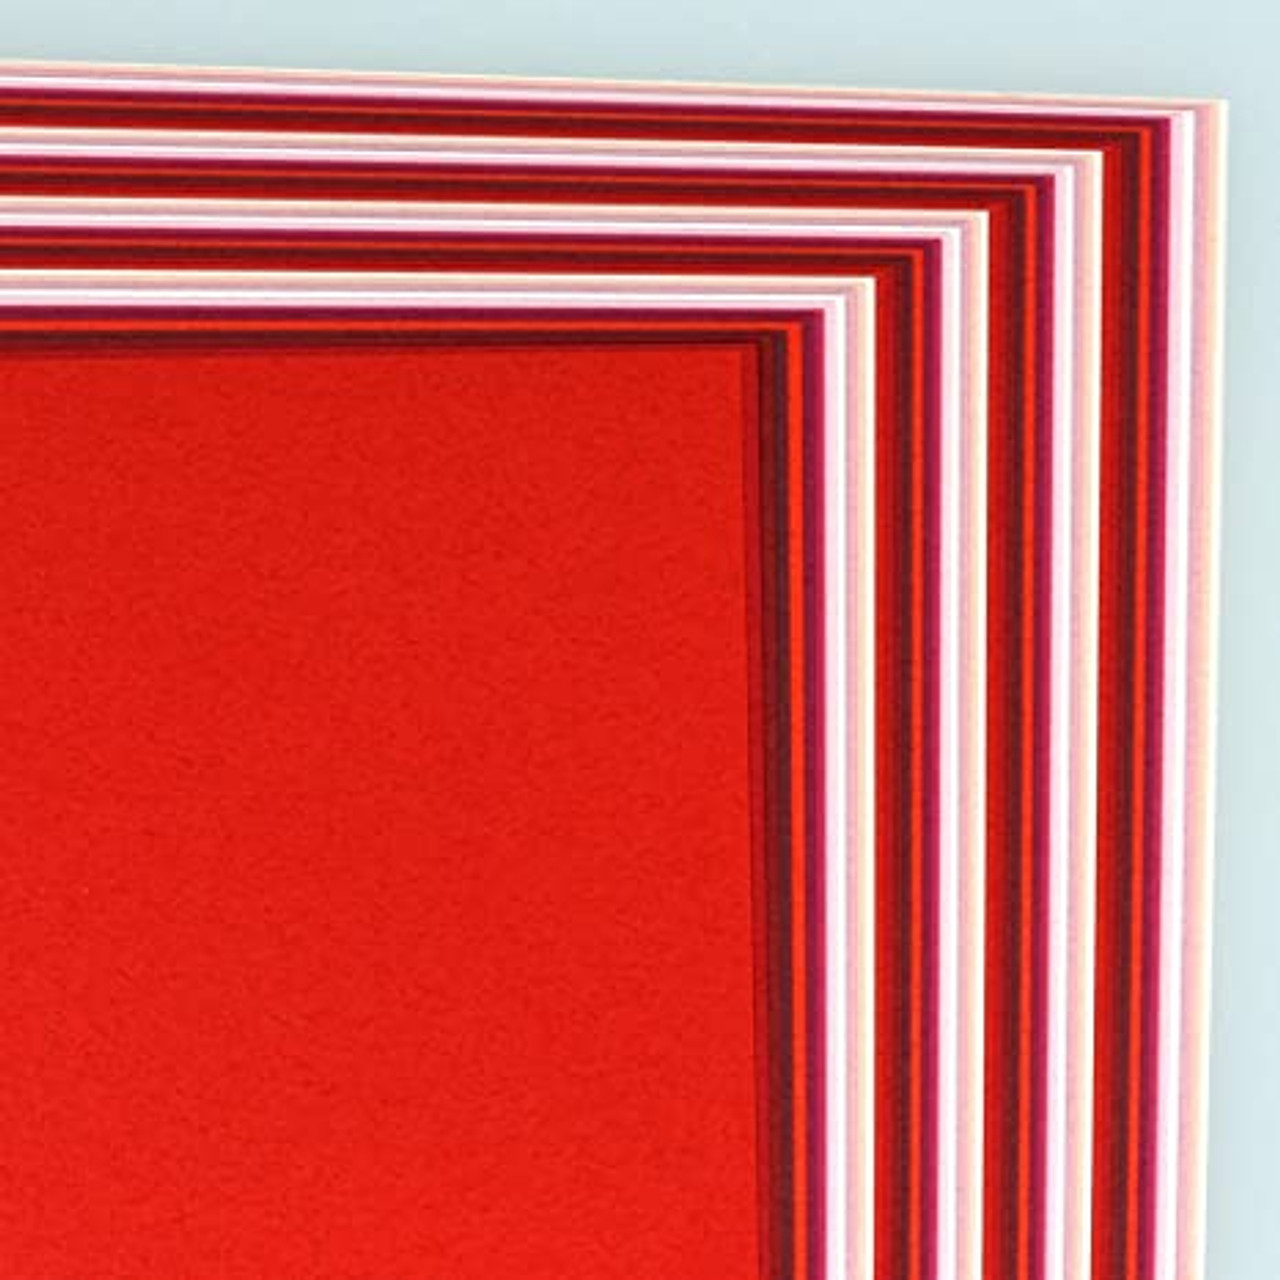 48 Sheets Japanese Tant Red Origami Paper-12 Shades of Red 6